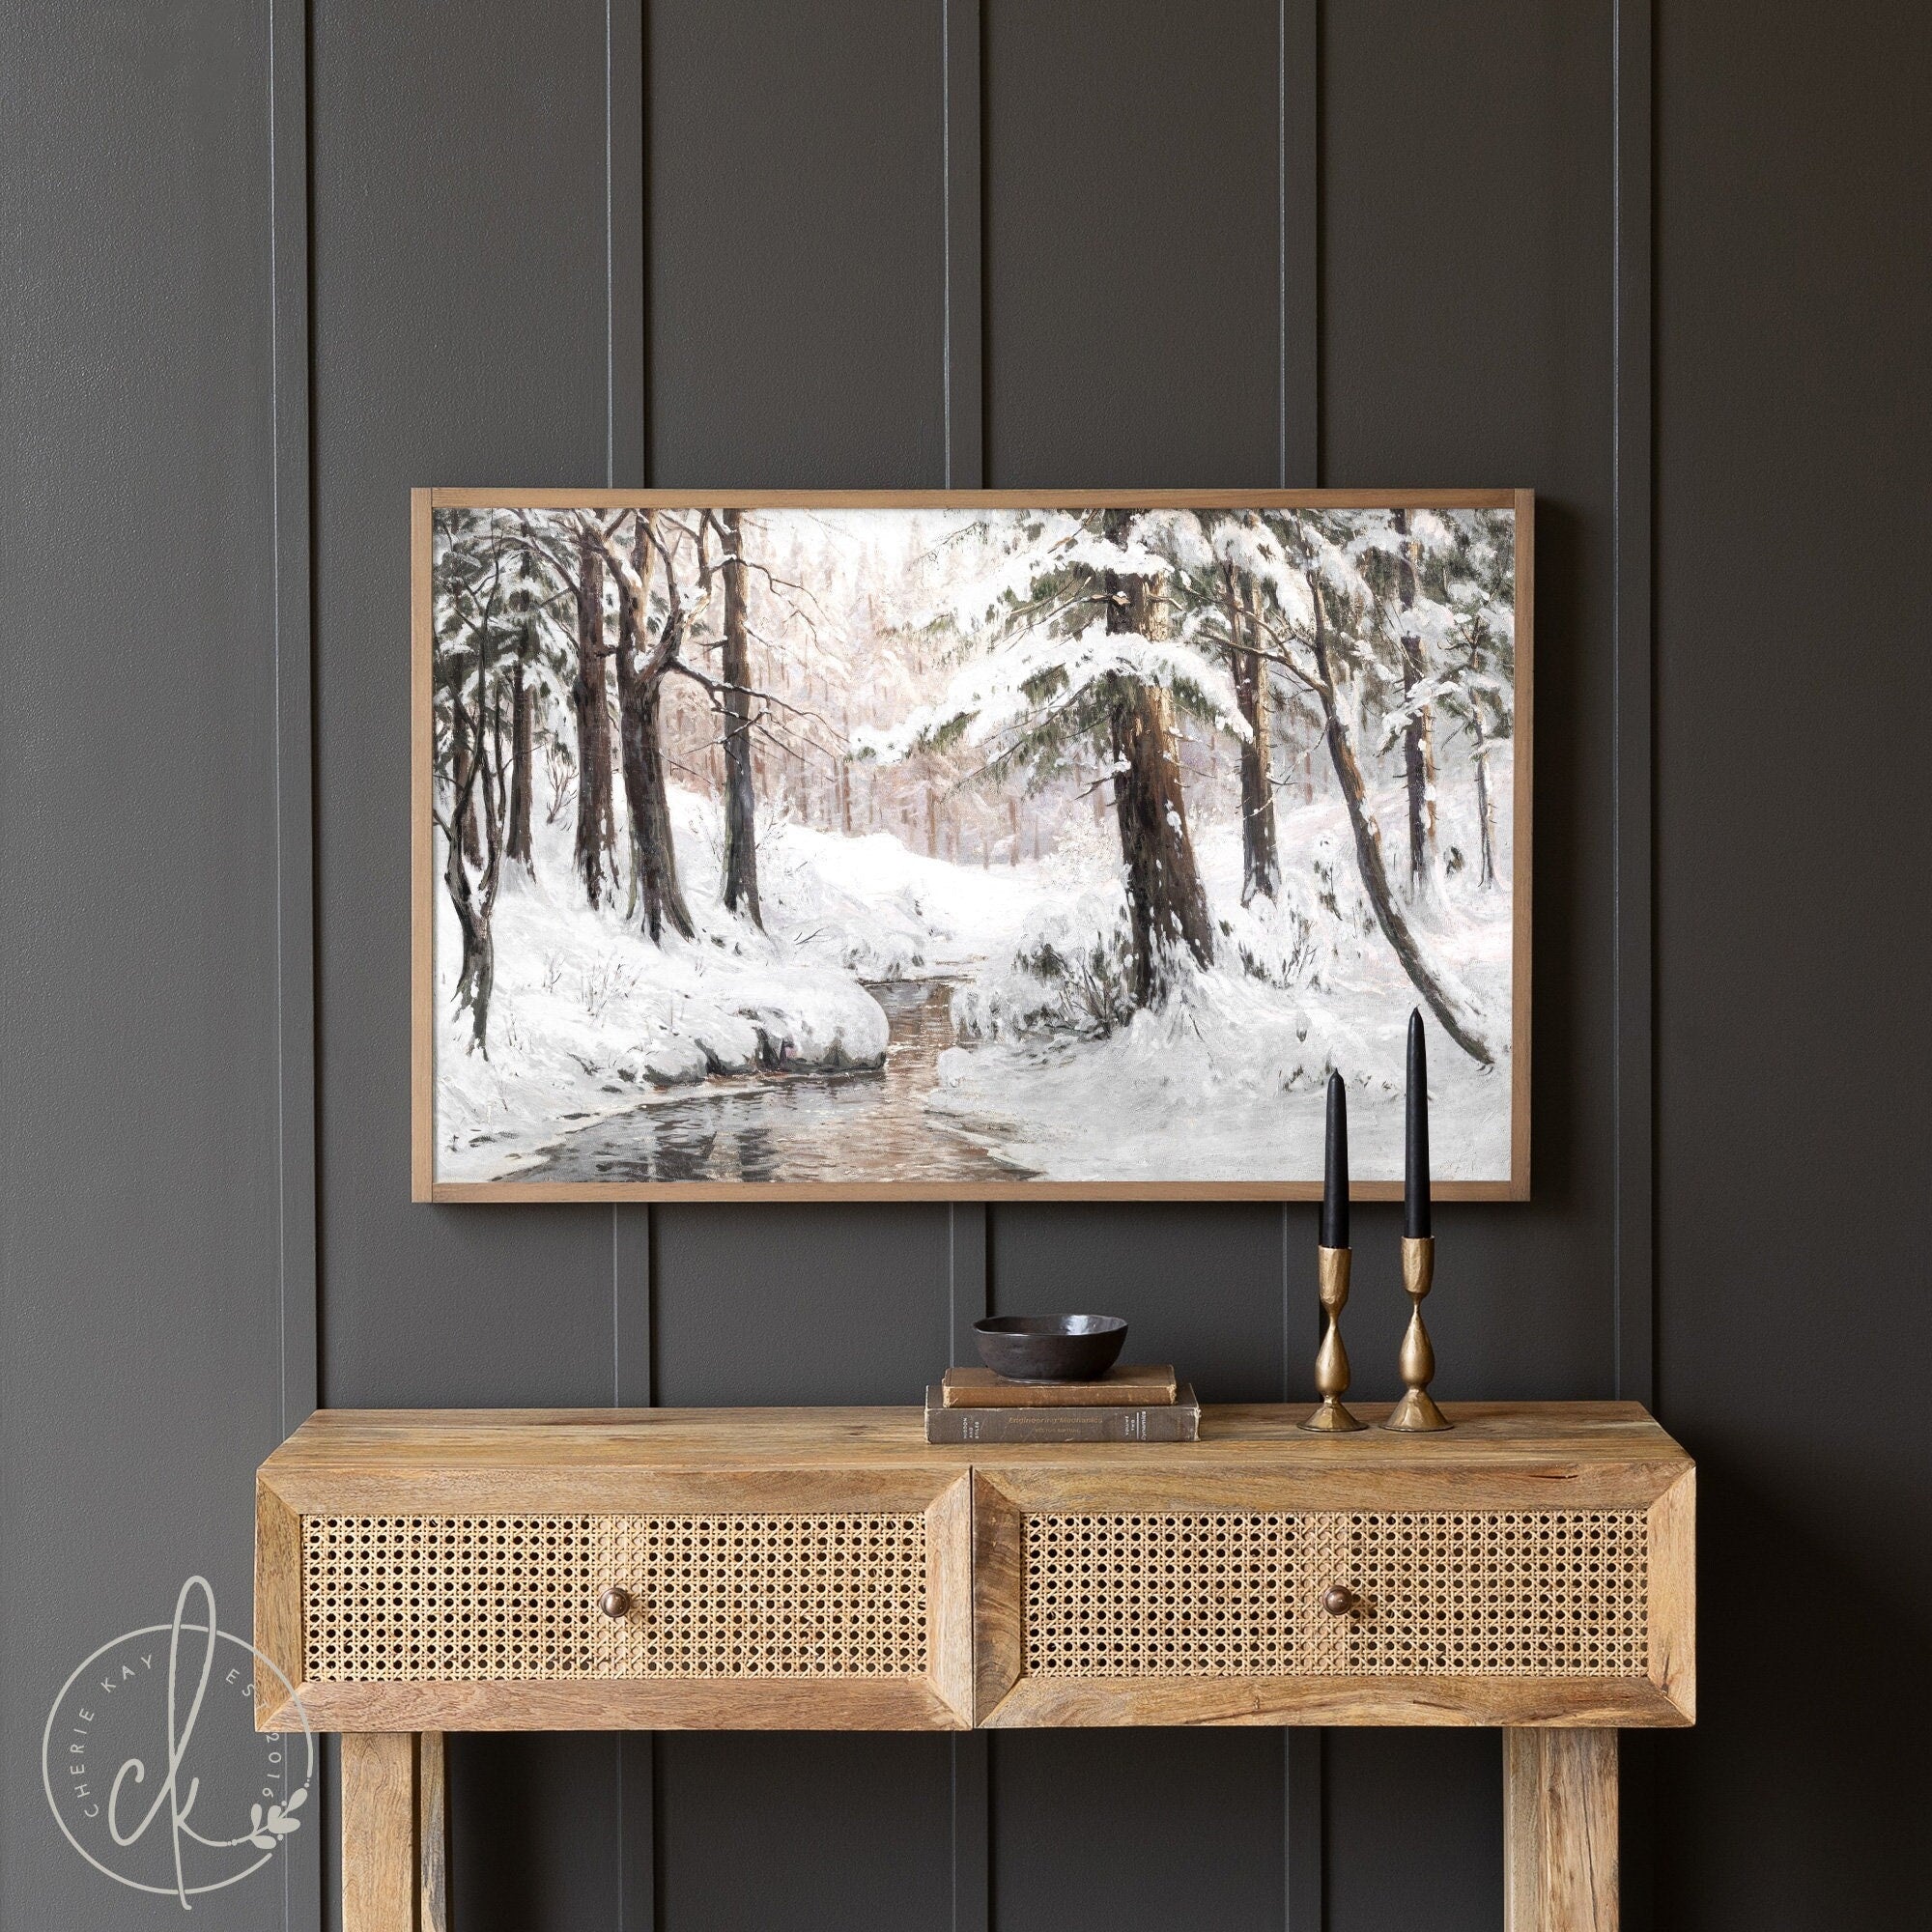 Winter Forest Painting | Snowy Trees Wall Art | Living Room Decor | Christmas Wall Decor | Winter Wonderland Painting